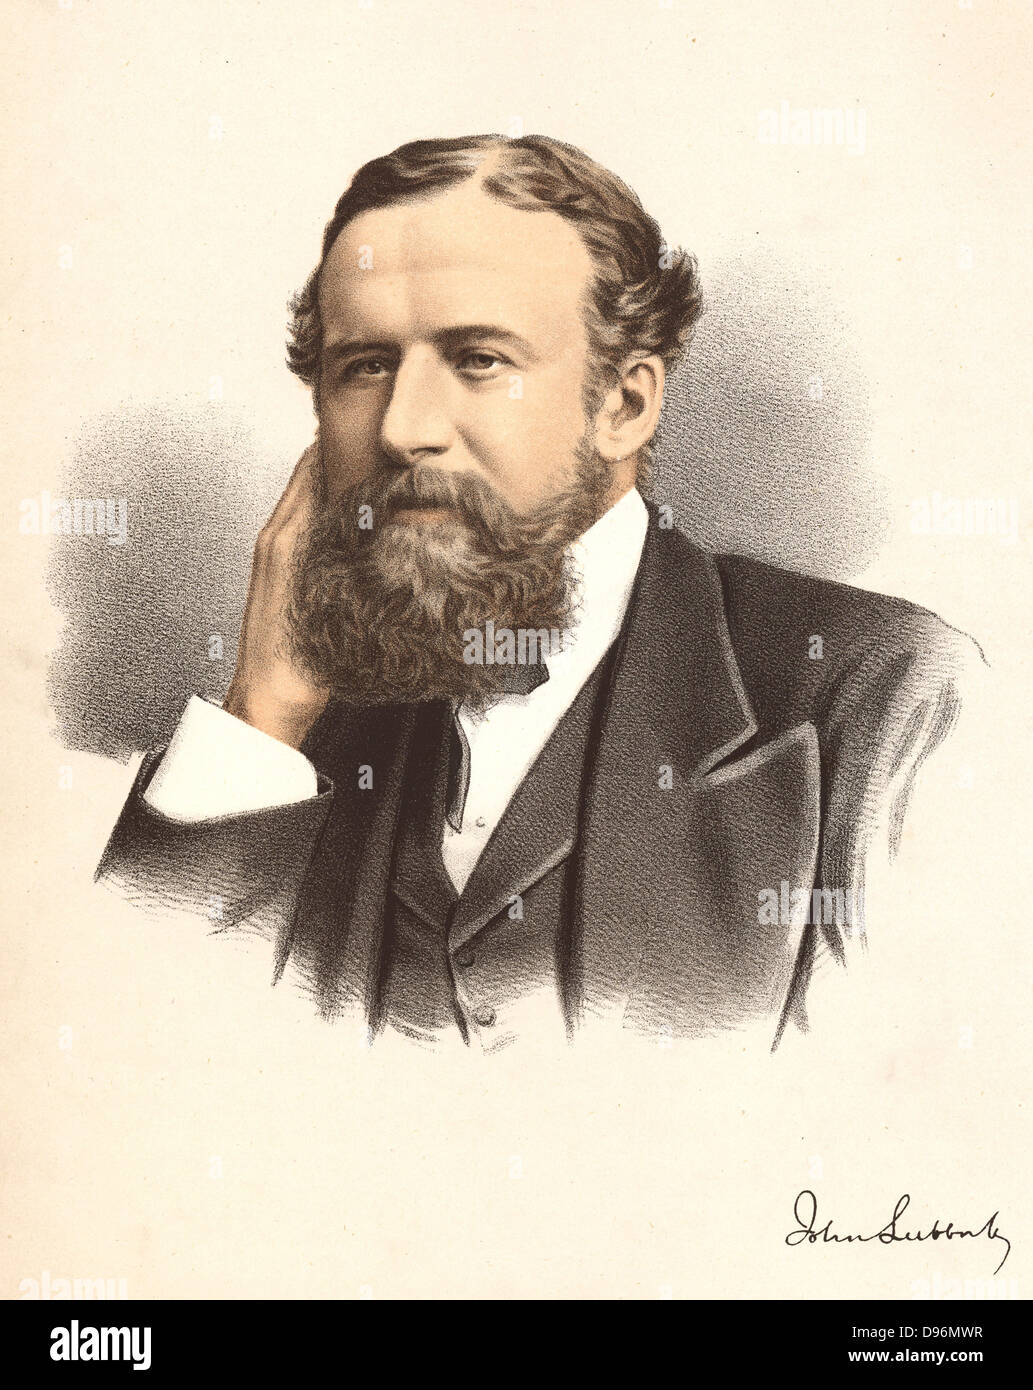 John Lubbock, first Baron Avebury (1834-1913) English banker, naturalist and archaeologist. From 'The Modern Portrait Gallery', Cassell, Petter and Galpin, London c.1880. Tinted lithograph Stock Photo